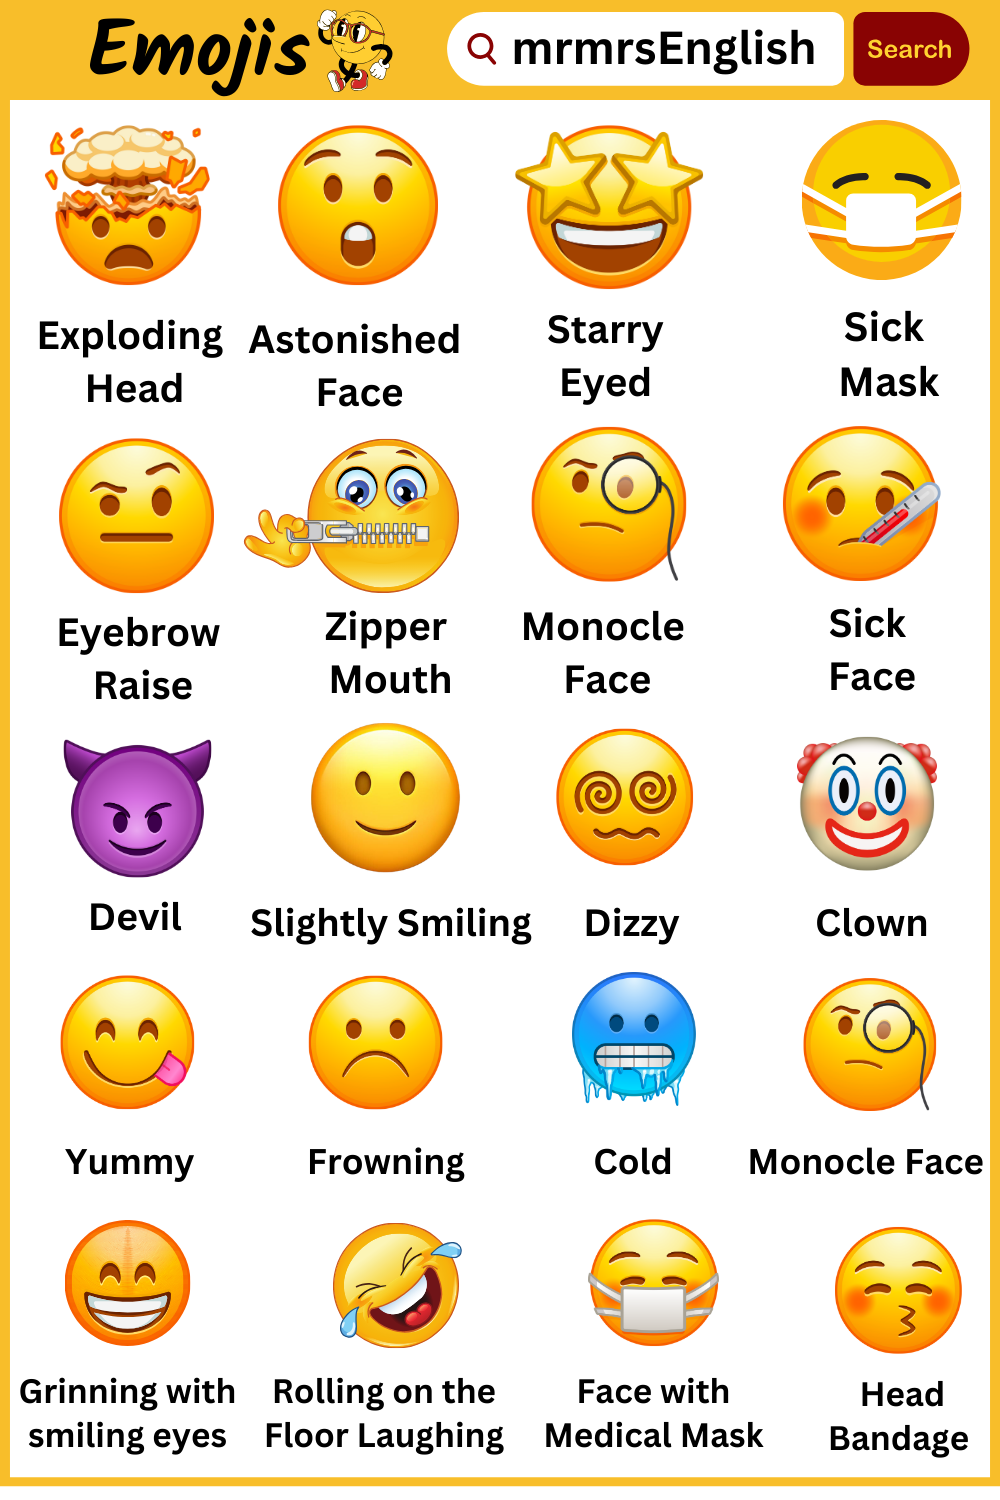 Emojis and Their Meaning